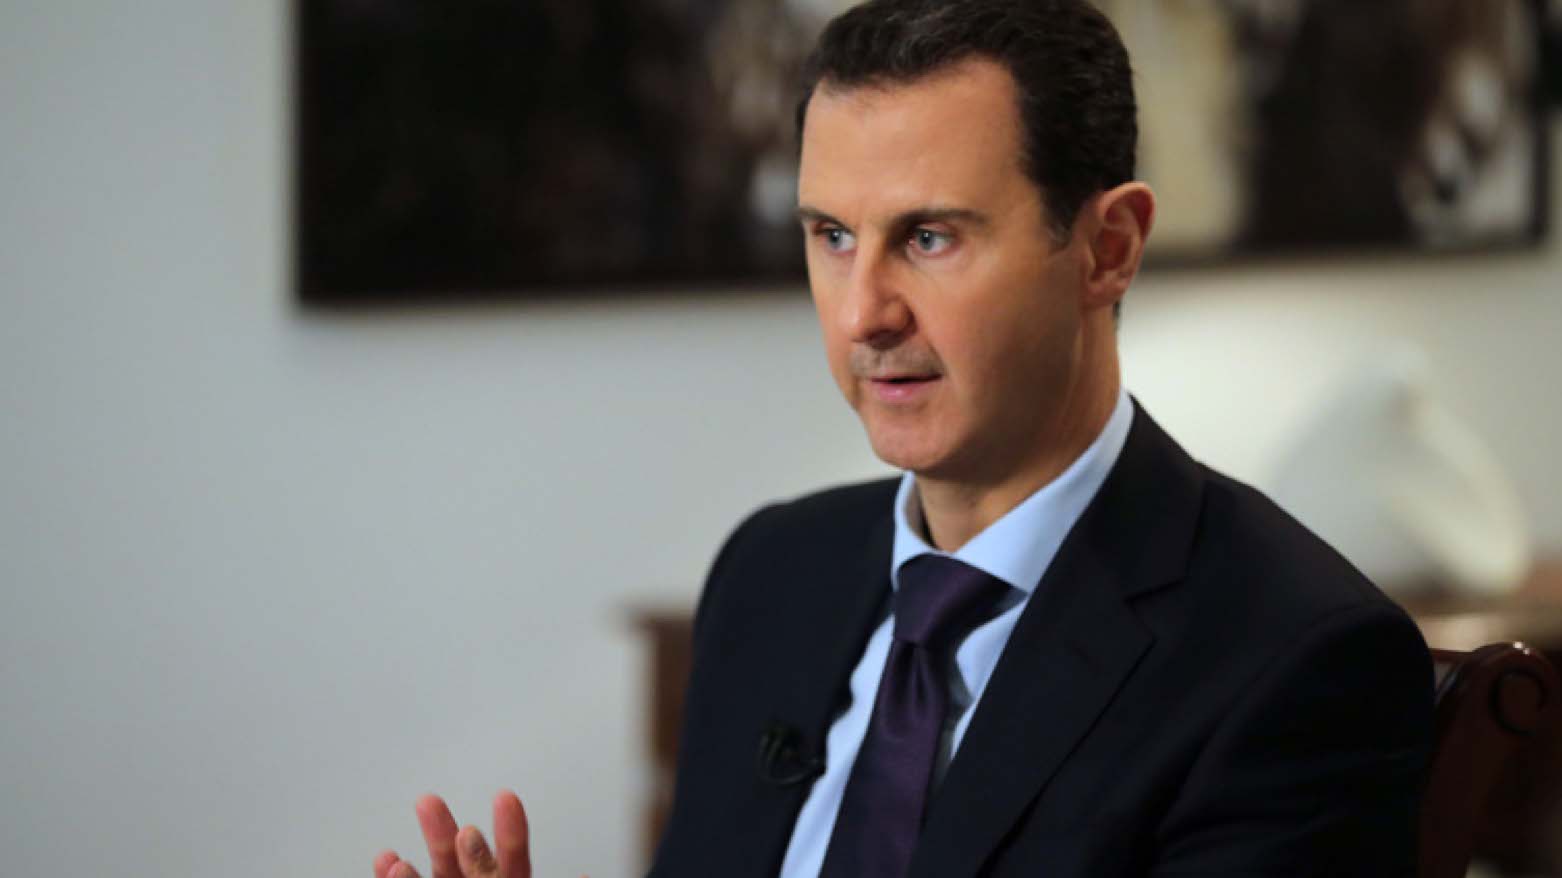 Syrian President Bashar al-Assad gestures during an interview with AFP in the capital Damascus on February 11, 2016 (Photo: AFP/JOSEPH EID/Getty Images)